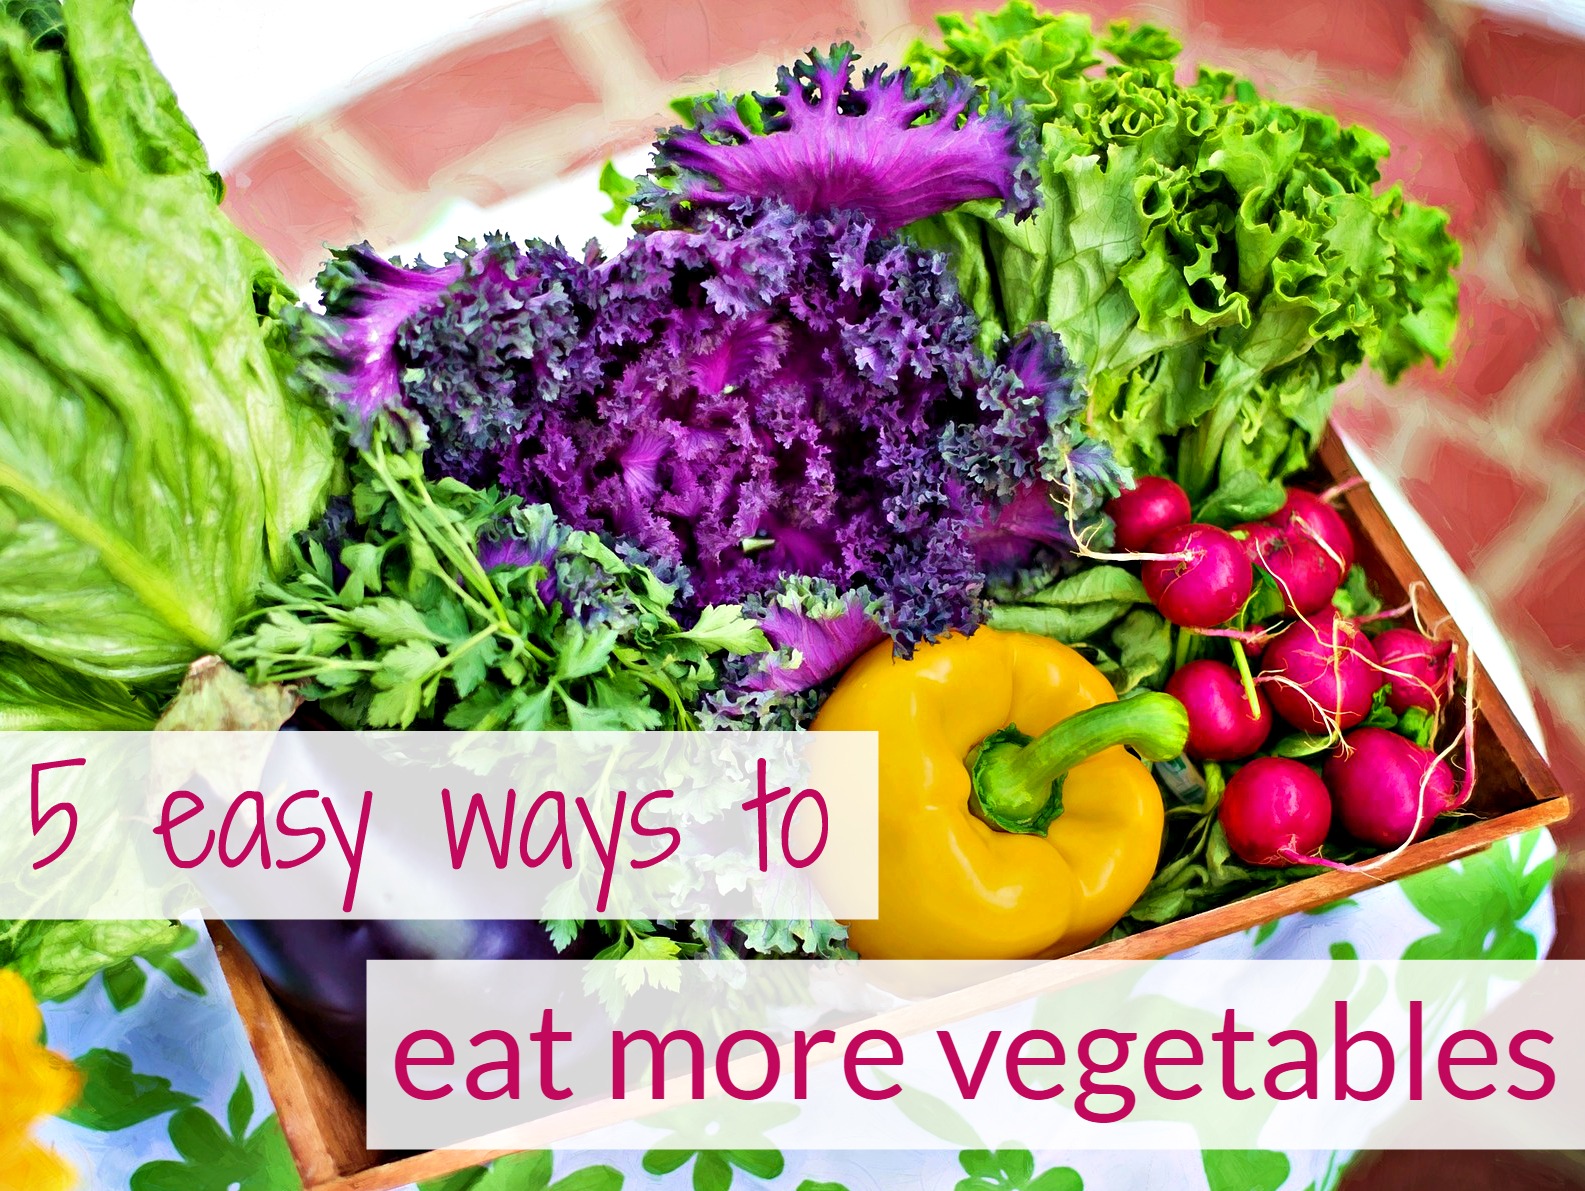 5 easy ways to eat more vegetables